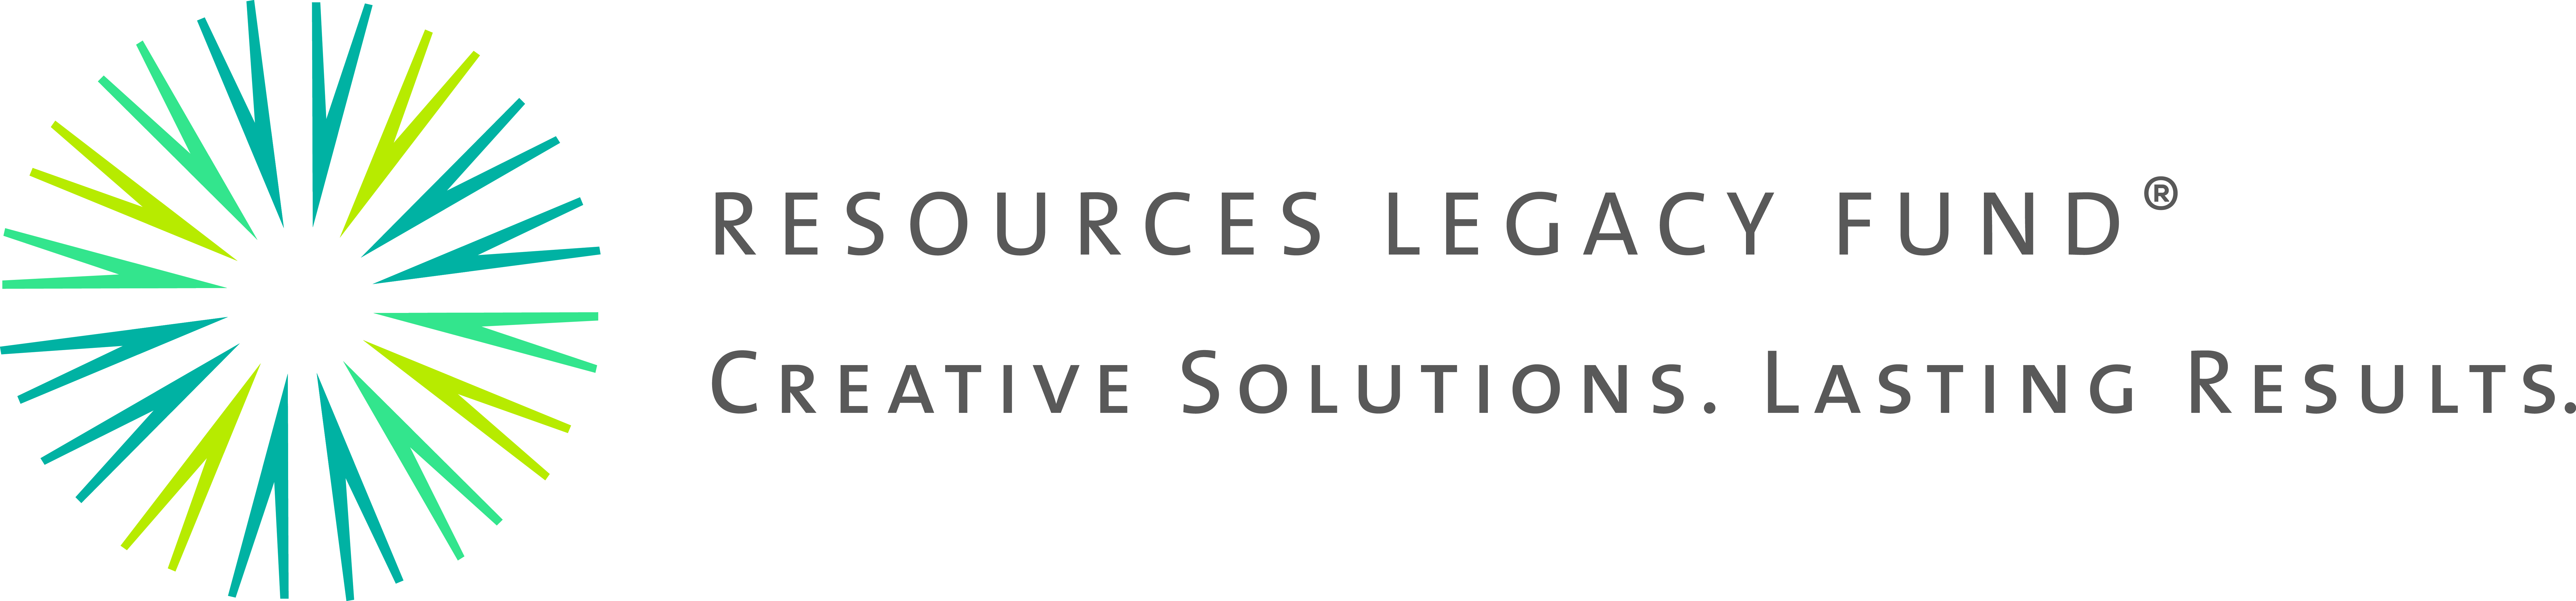 Resources Legacy Fund (Creative Solutions, Lasting Results) Logo